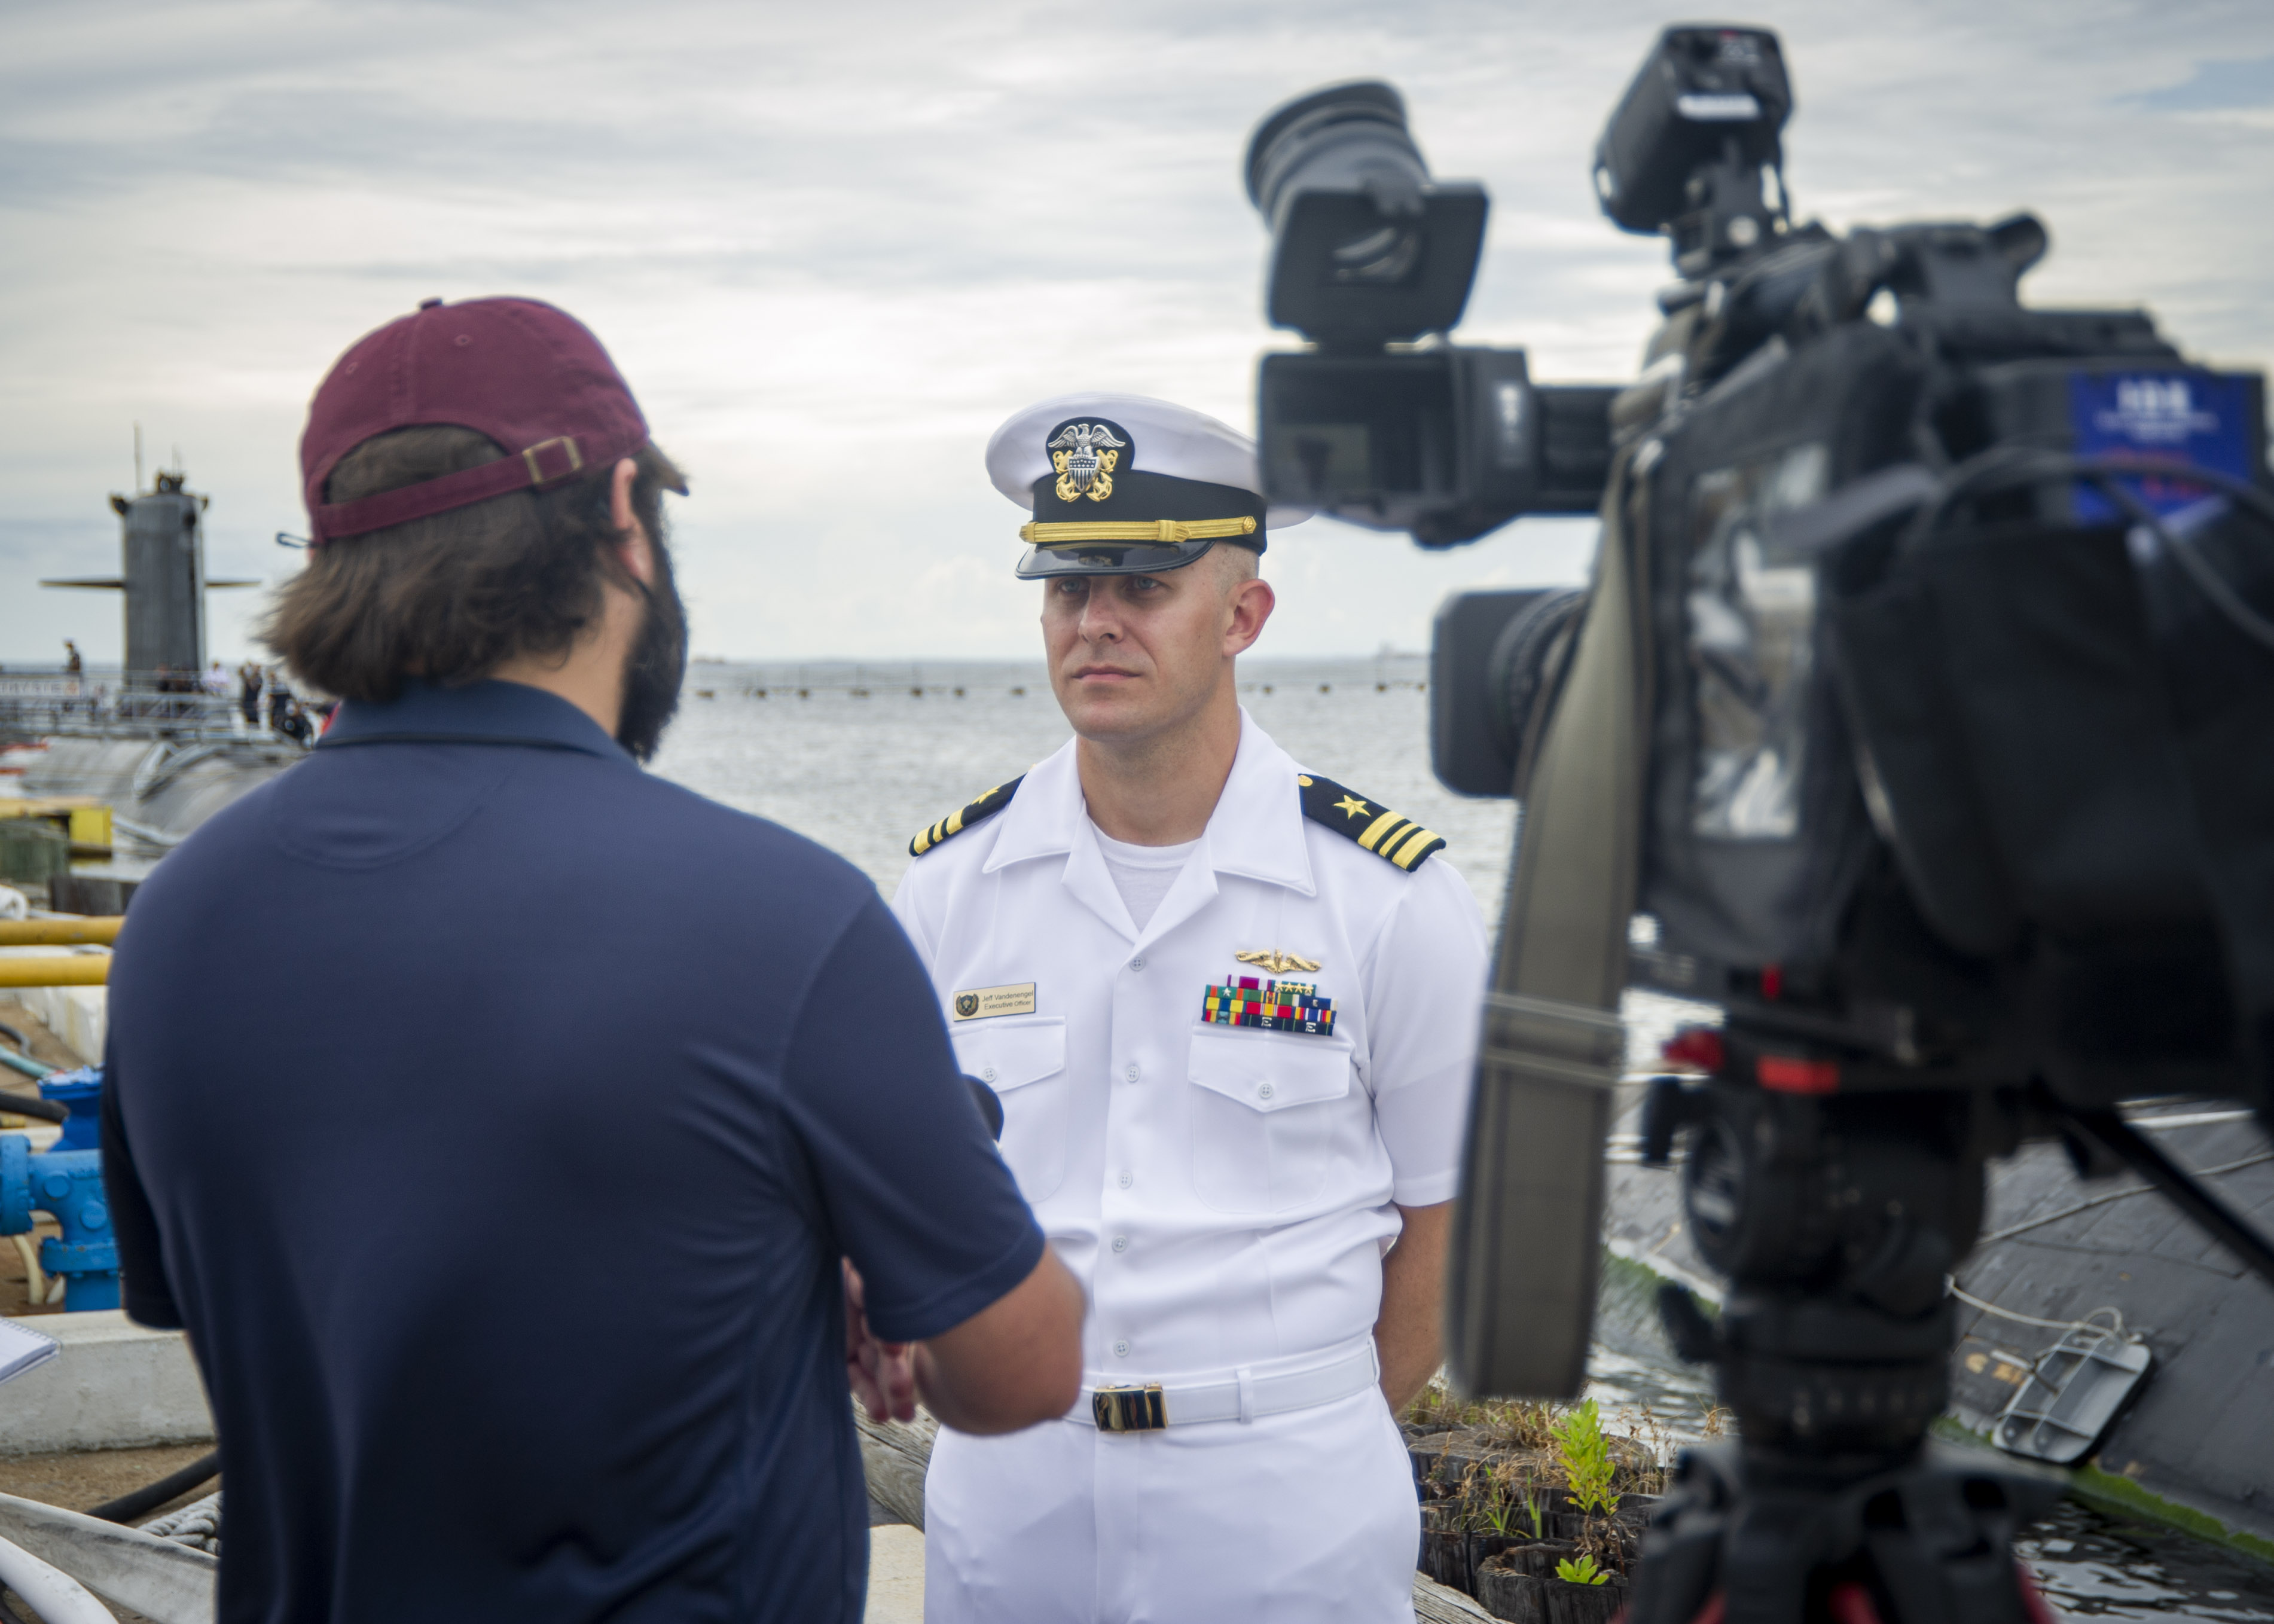 Lt. Cmdr. Jeff Vandenengel, executive officer of the Virginia-class fast-attack submarine USS John Warner (SSN 785), conducts a media interview after the arrival of the French submarine FNS Améthyste (S605) at Naval Station Norfolk, Sept. 16, 2021